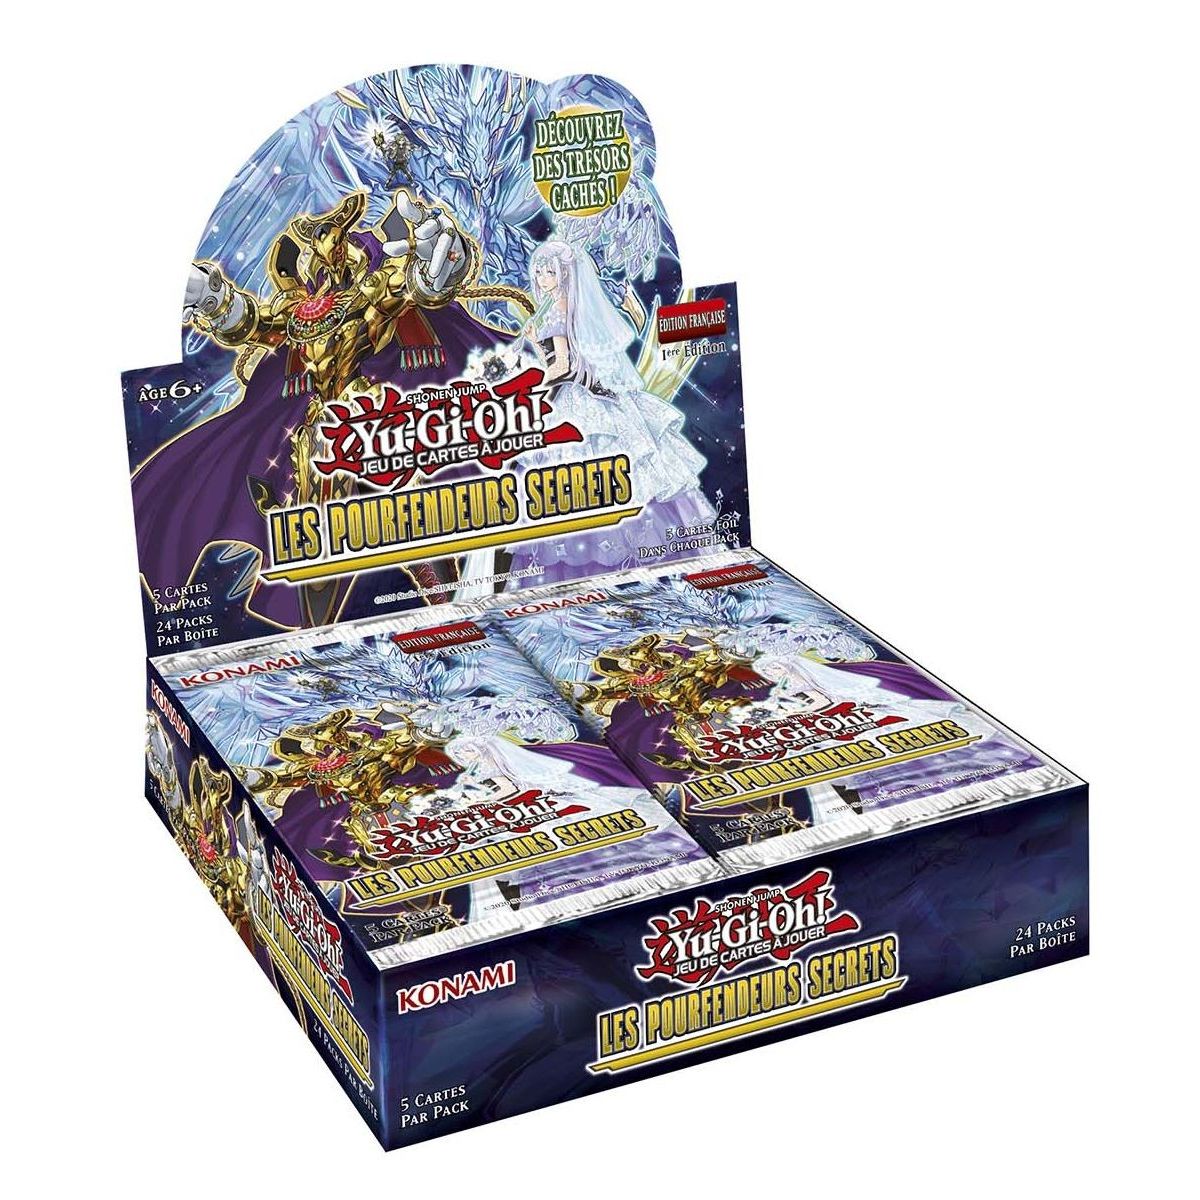 Yu Gi Oh! - Display - Box of 24 Boosters - Les Pourfendeurs Secrets - FR